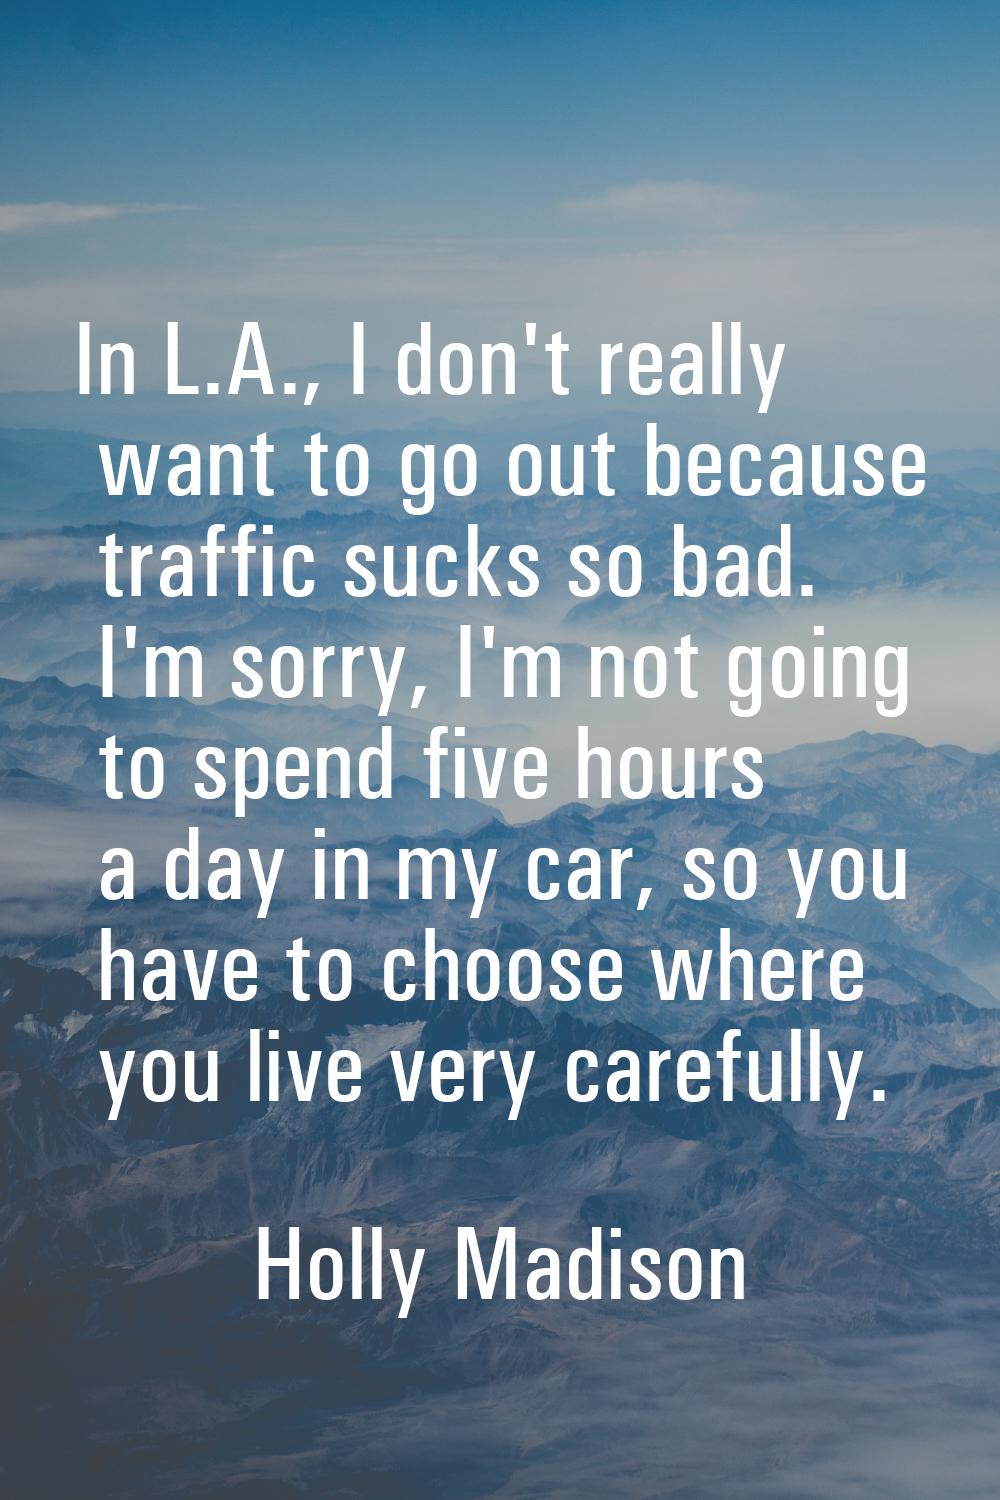 In L.A., I don't really want to go out because traffic sucks so bad. I'm sorry, I'm not going to sp